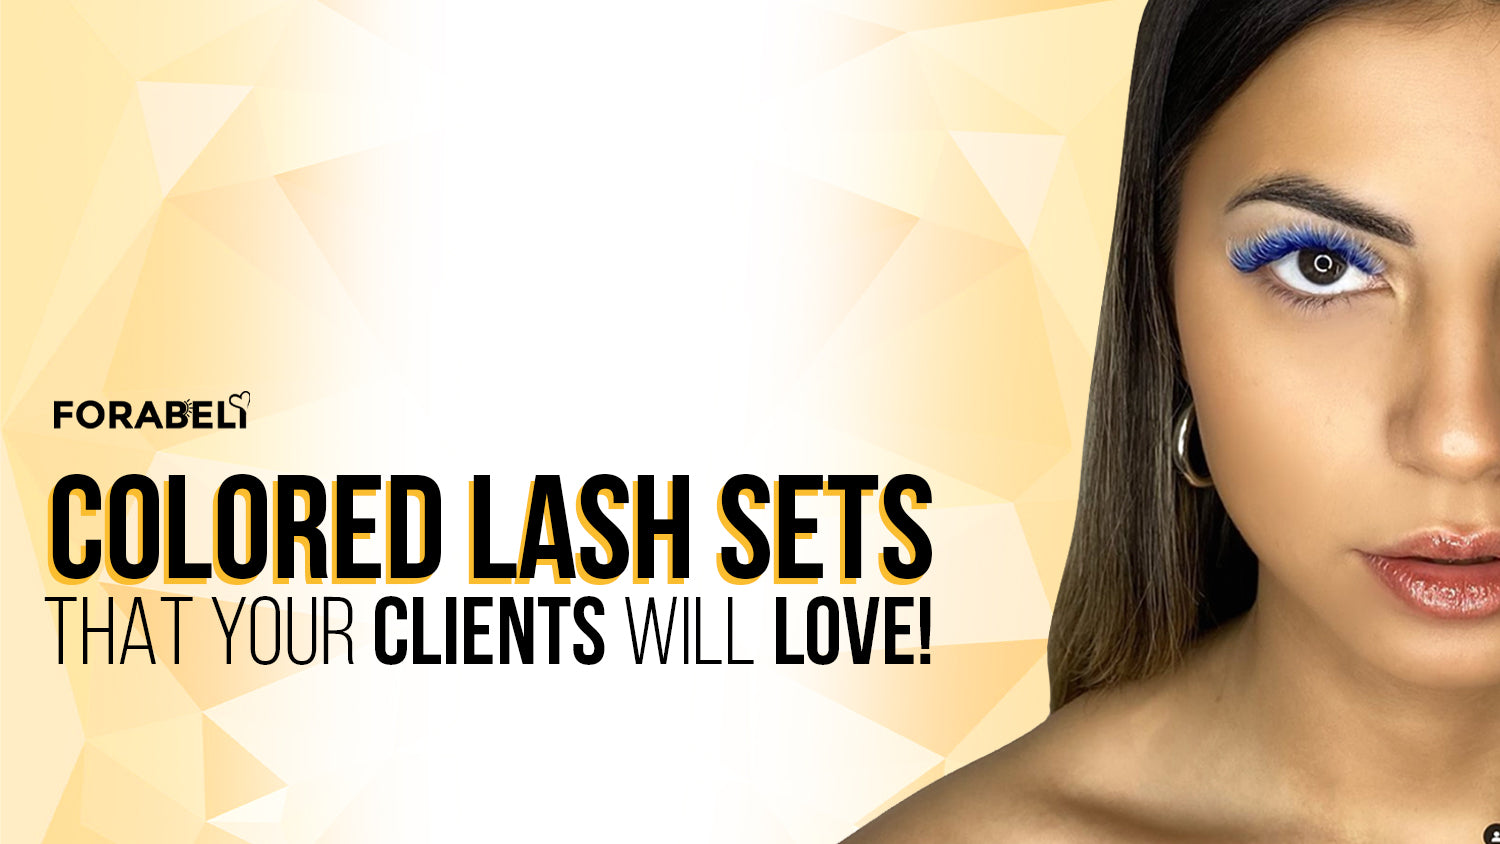 Forabeli SETS WILL – CLIENTS COLORED LOVE! LASH YOUR THAT